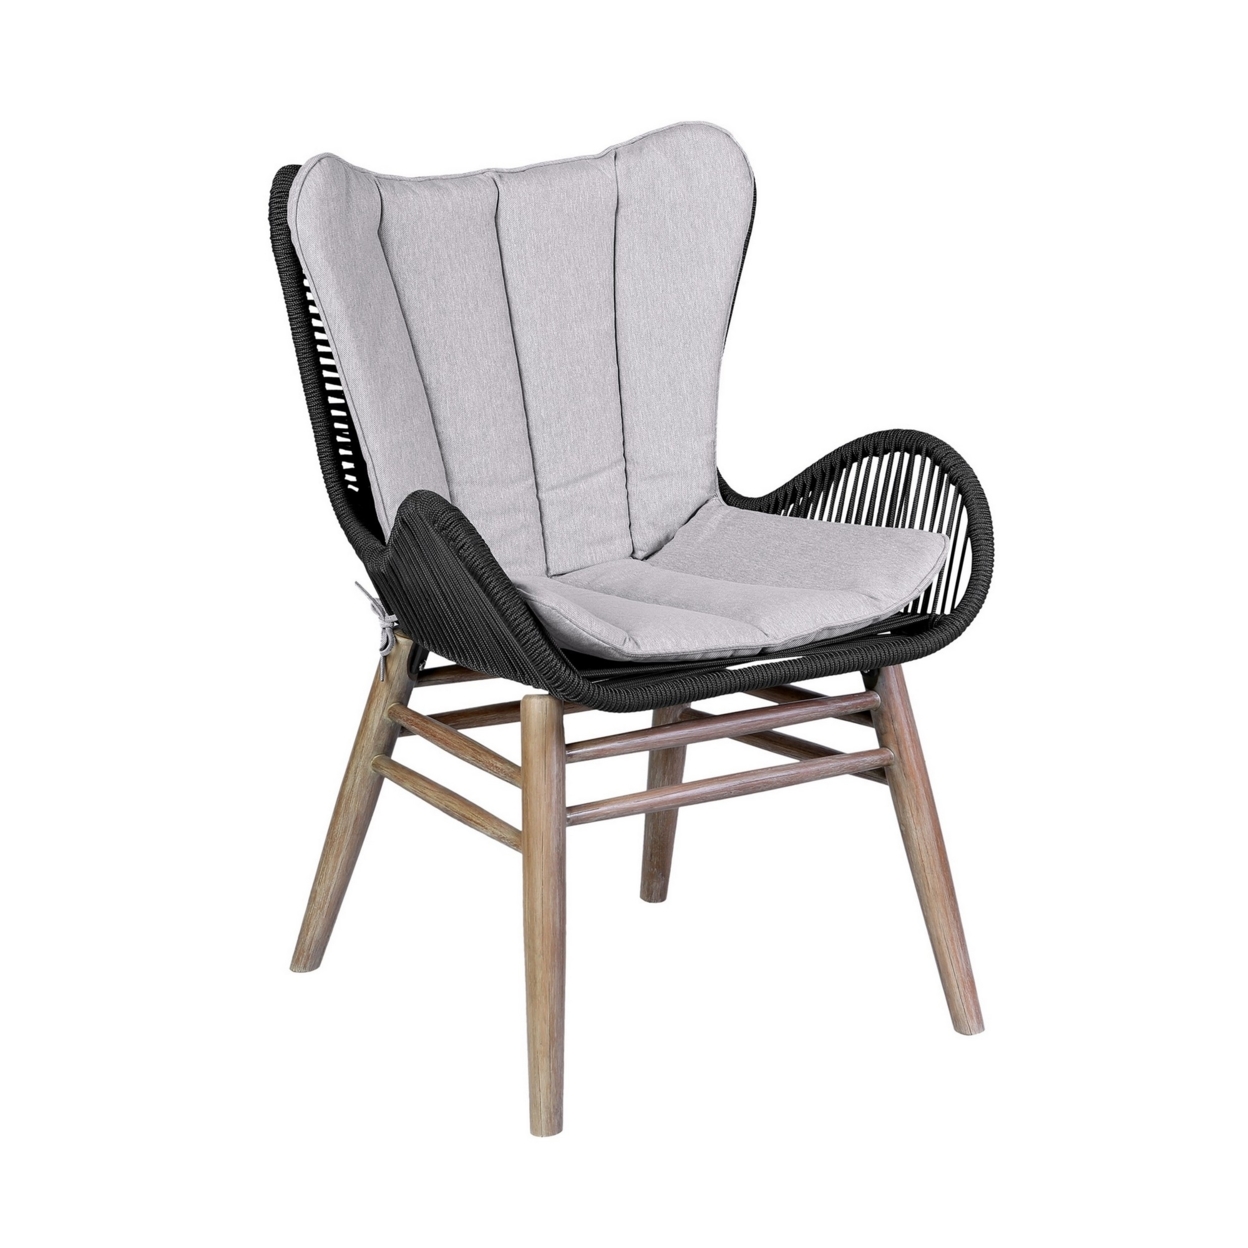 Luf 24 Inch Outdoor Dining Chair, Woven Rope Tuft, Curved Arms, Black- Saltoro Sherpi